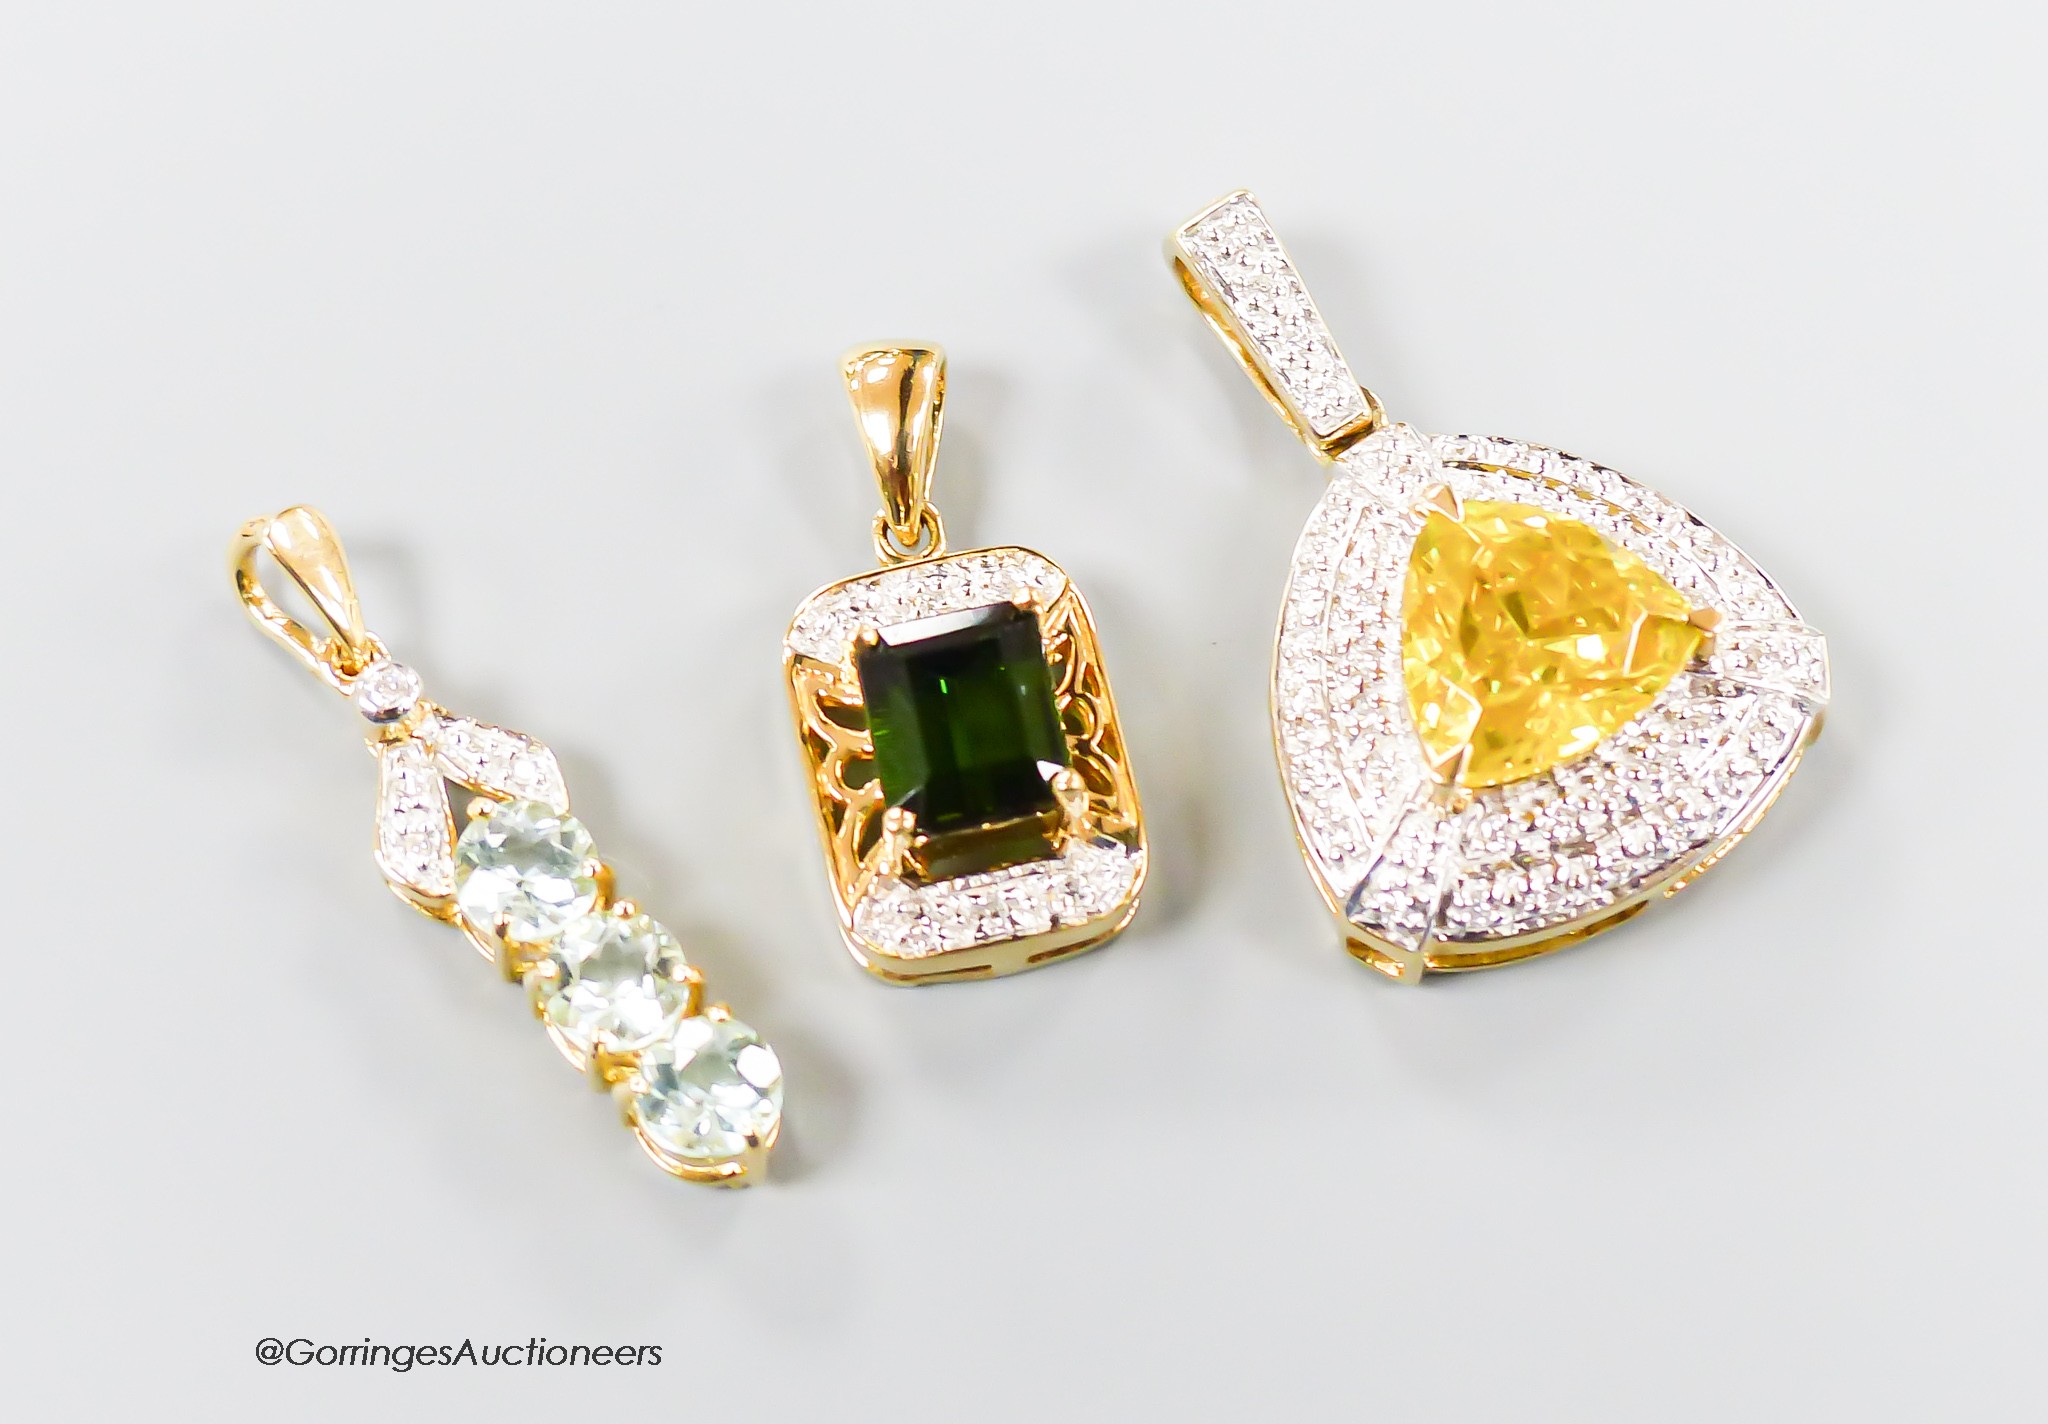 Three assorted modern 18ct gold and gem set pendants, including sphalerite and diamond, overall 27mm, green tourmaline and diamond and three stone tourmaline and diamond chip line pendant, gross 10.5 grams.